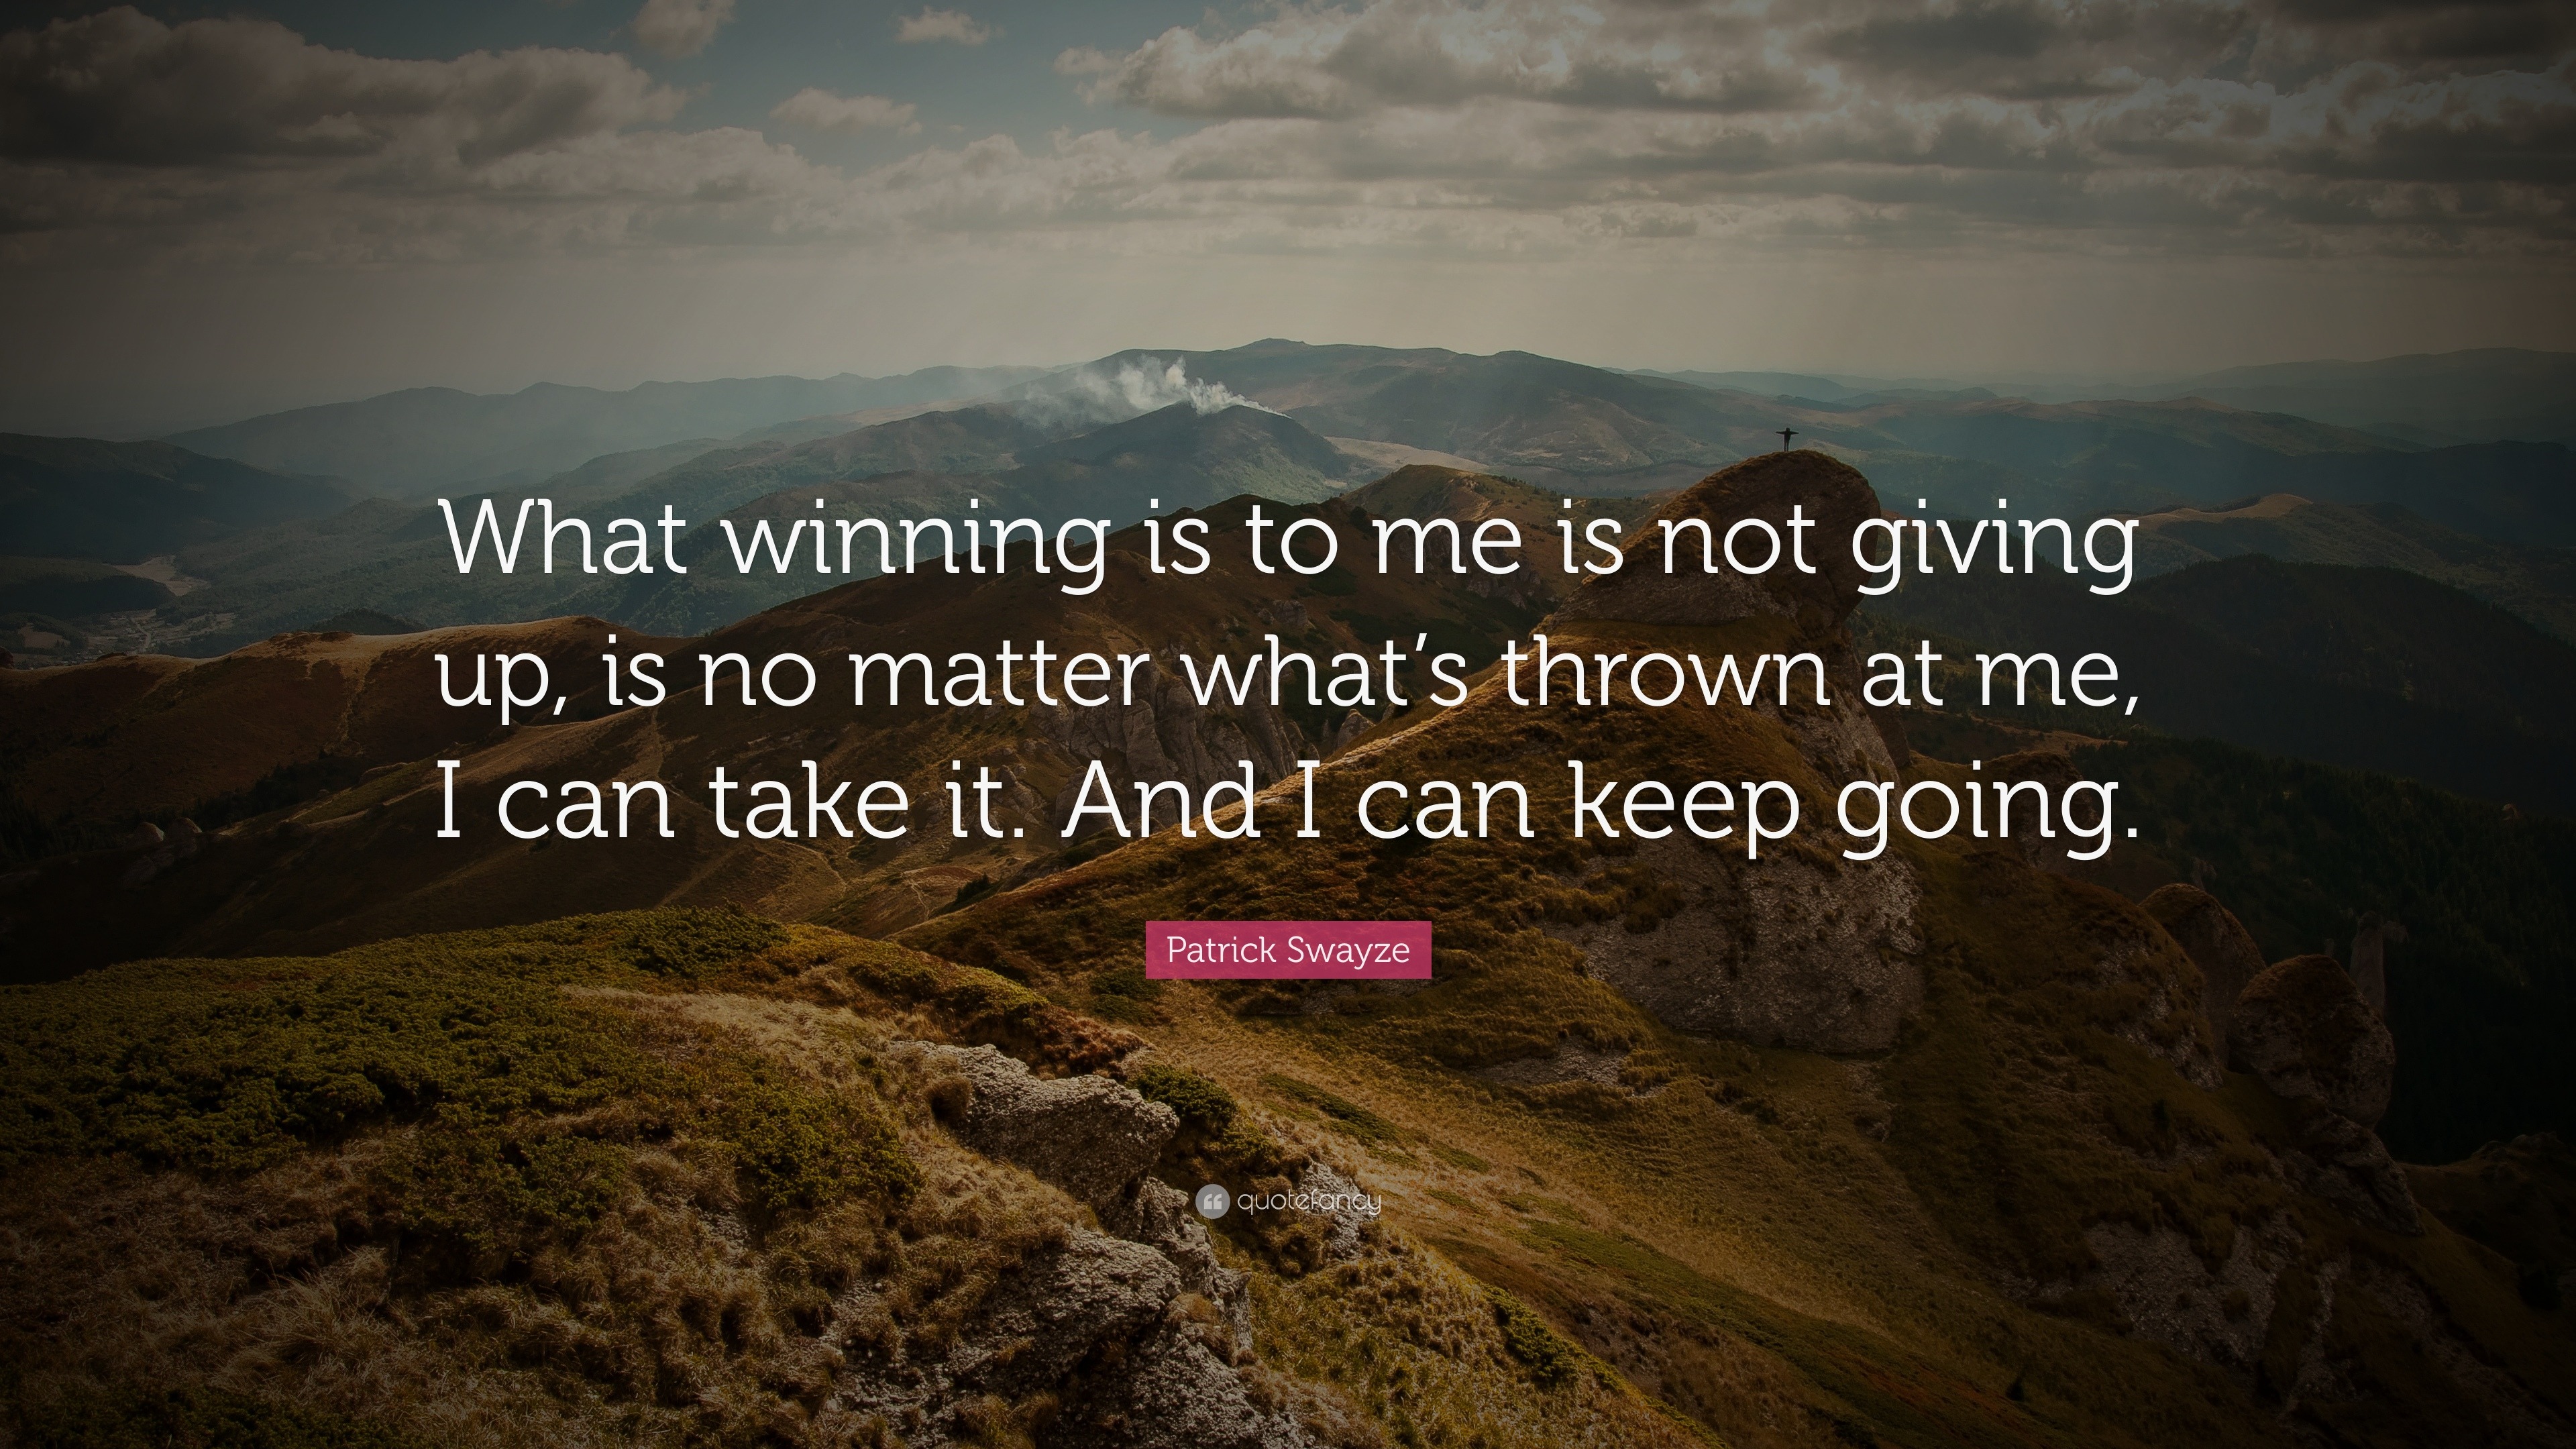 Patrick Swayze Quote: "What winning is to me is not giving u